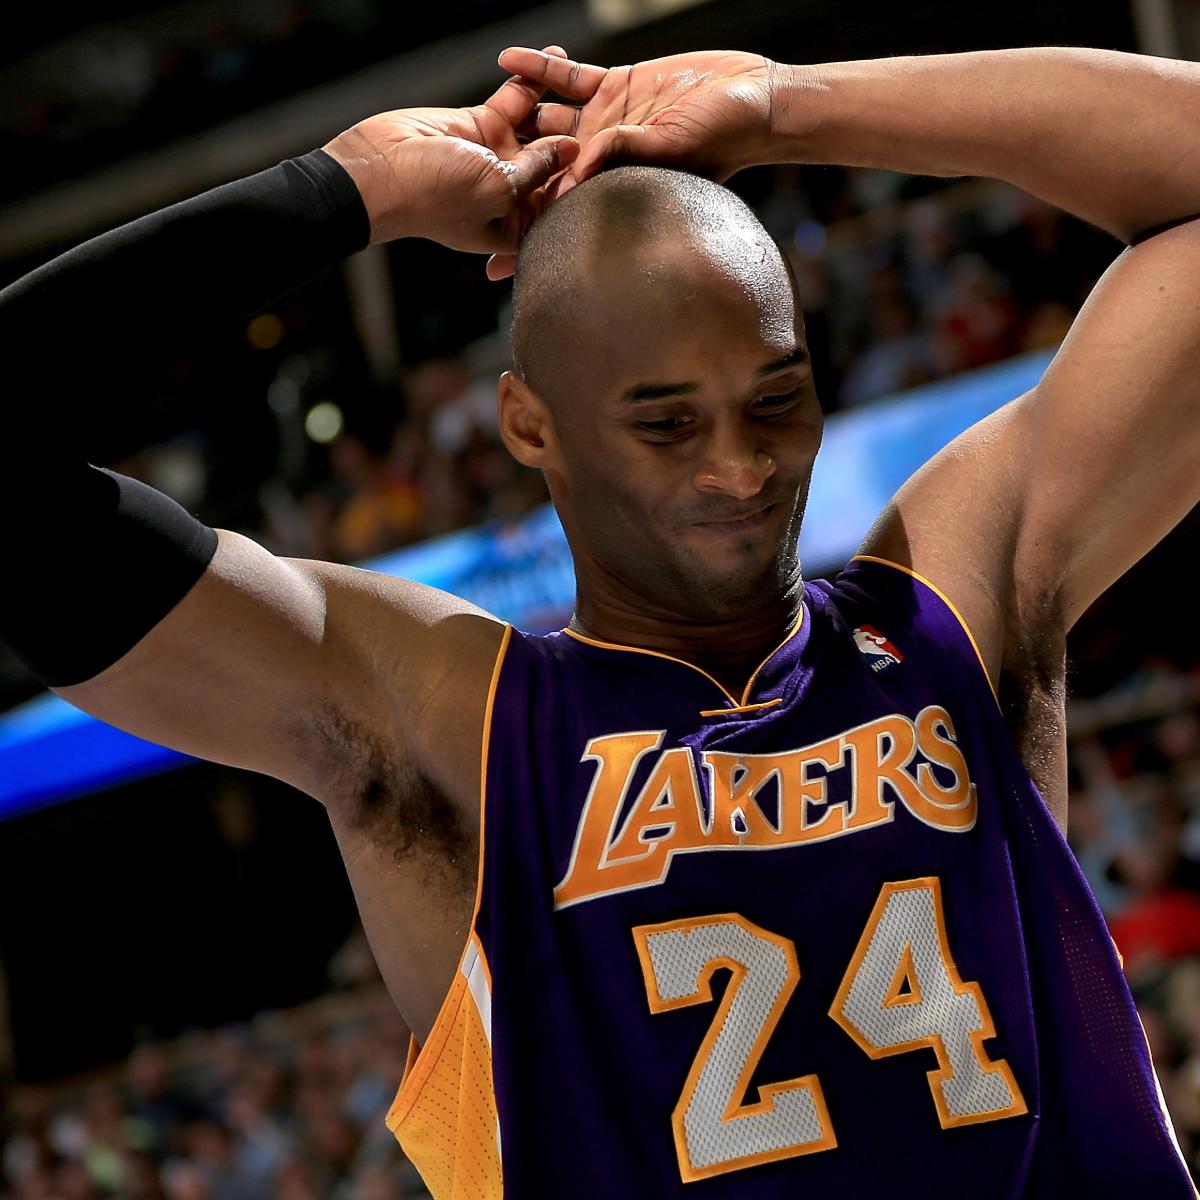 Is Kobe Bryant's Crack at L.A. Lakers' Age Really a Subtle Trade Suggestion ...